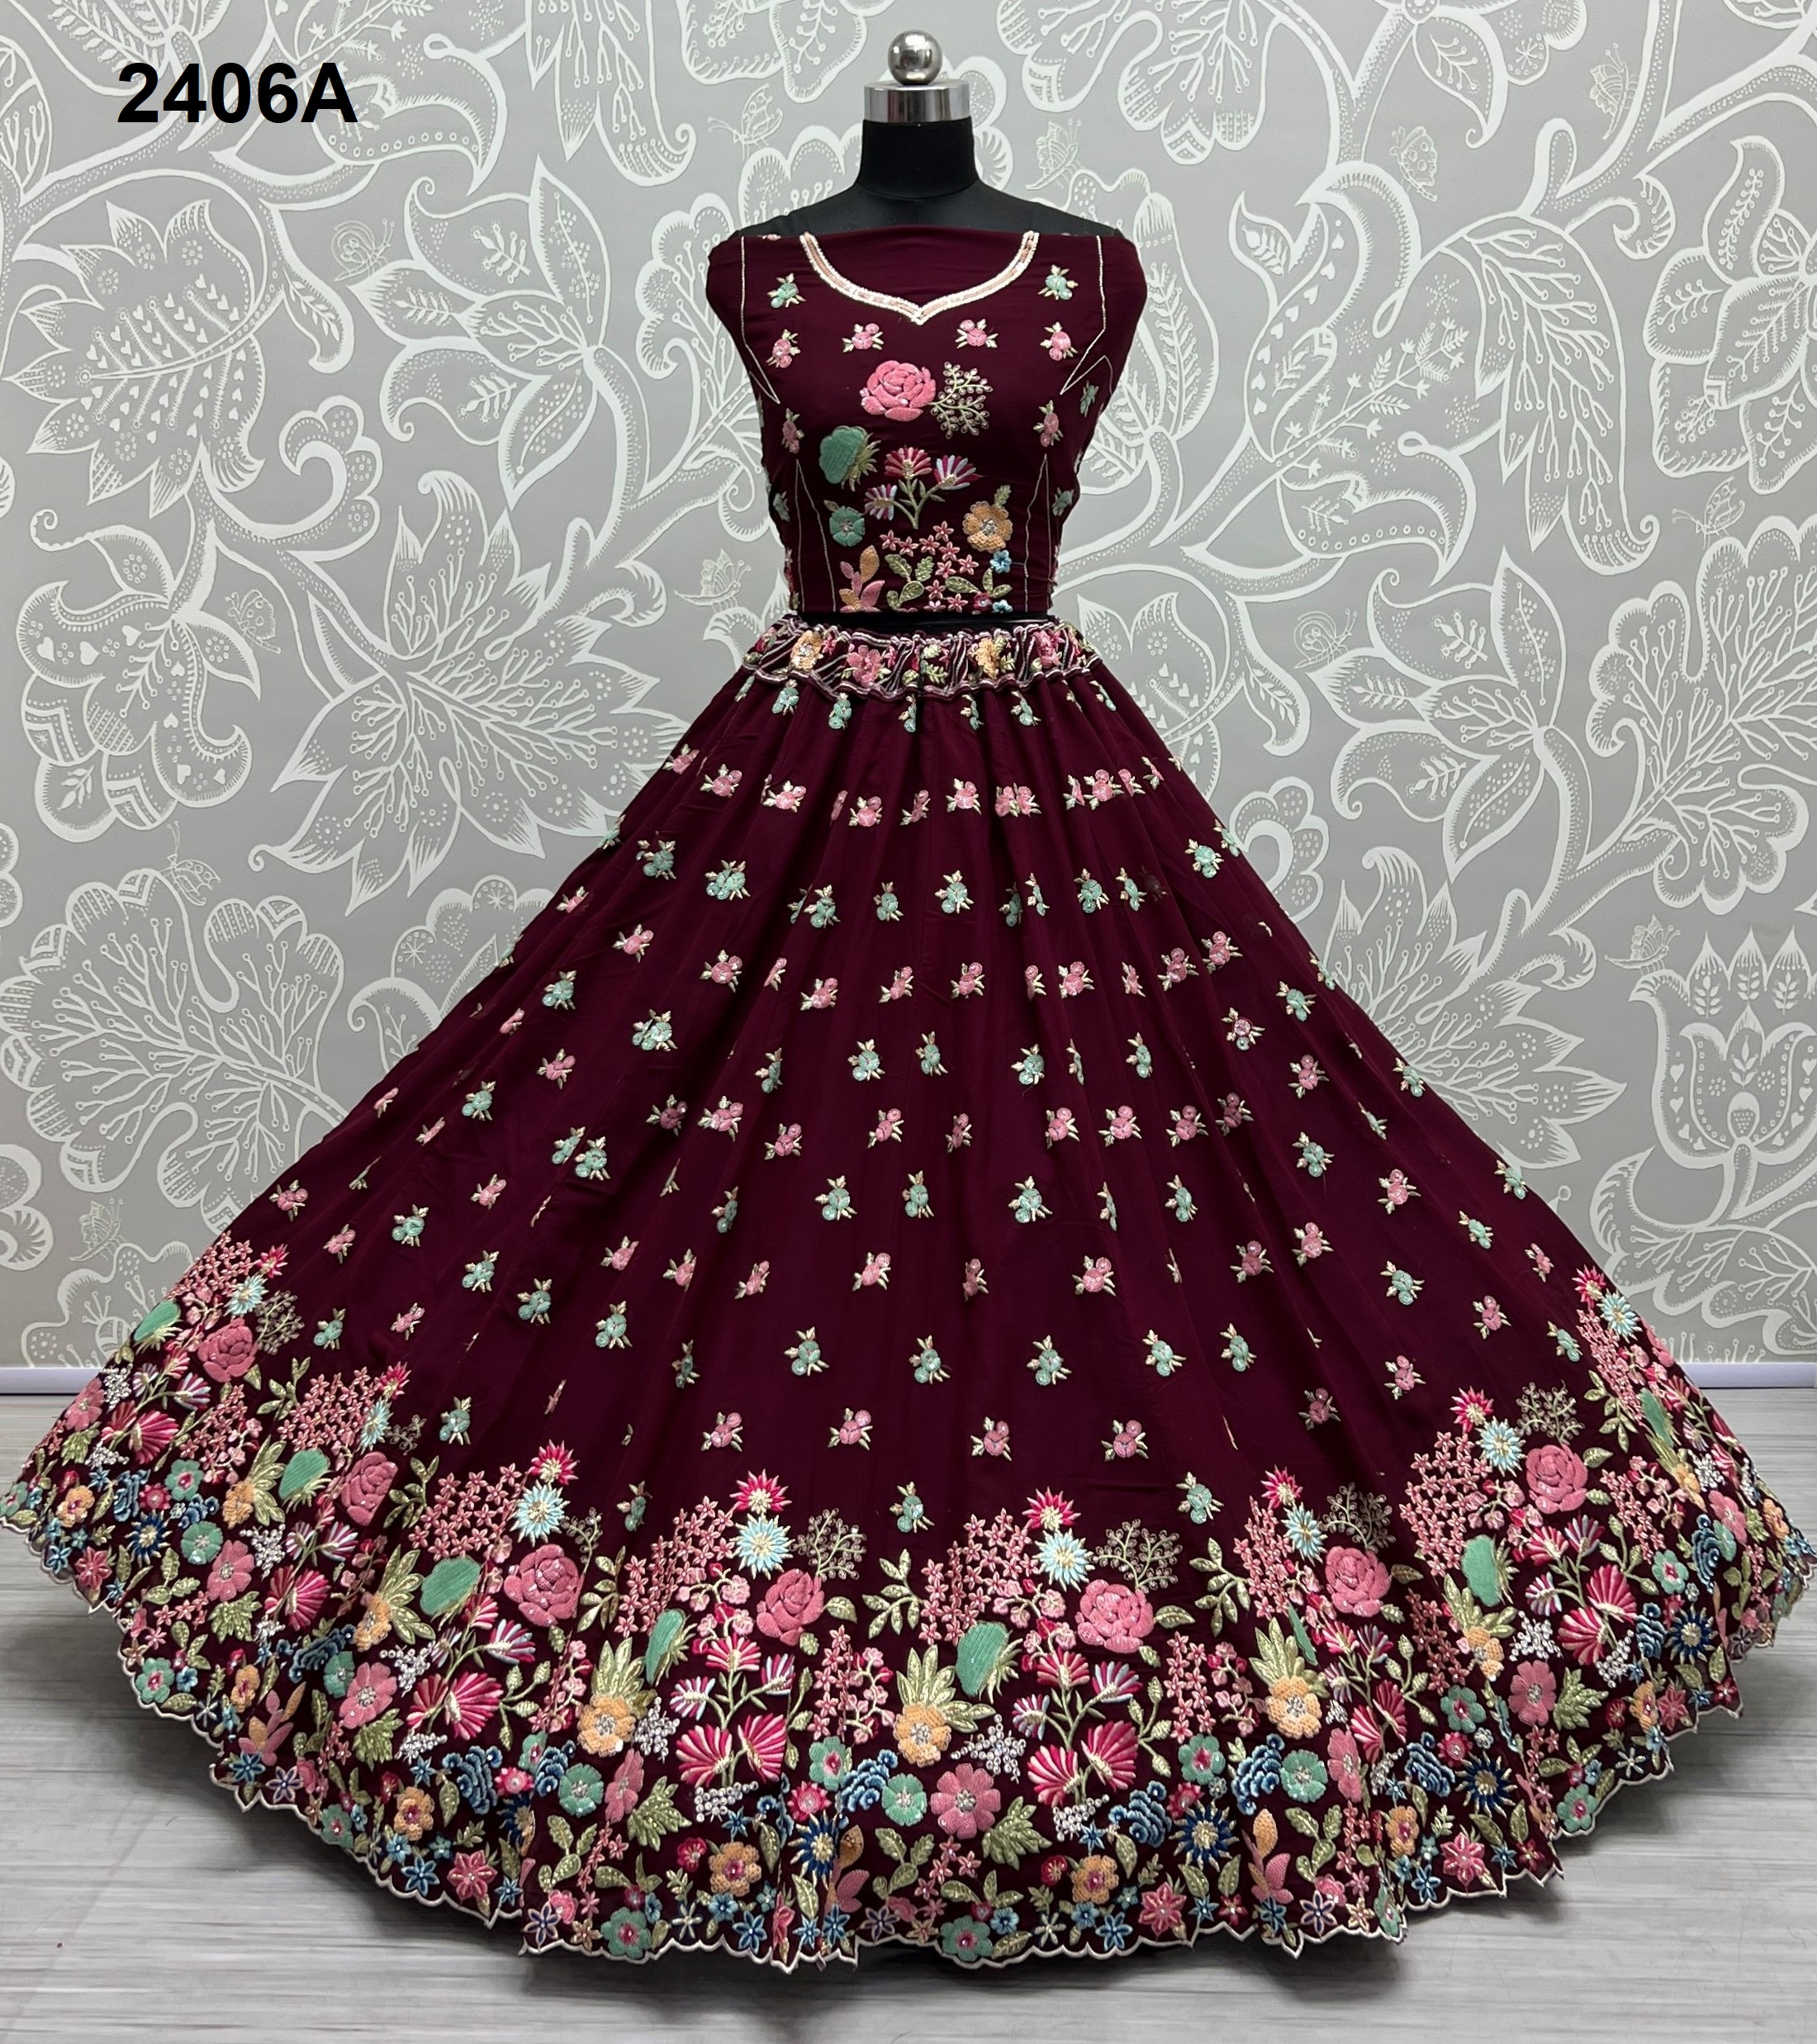 Marvellous Sequins and Fancy flower pattern Beautifully Crafted Lehenga choli in Georgette